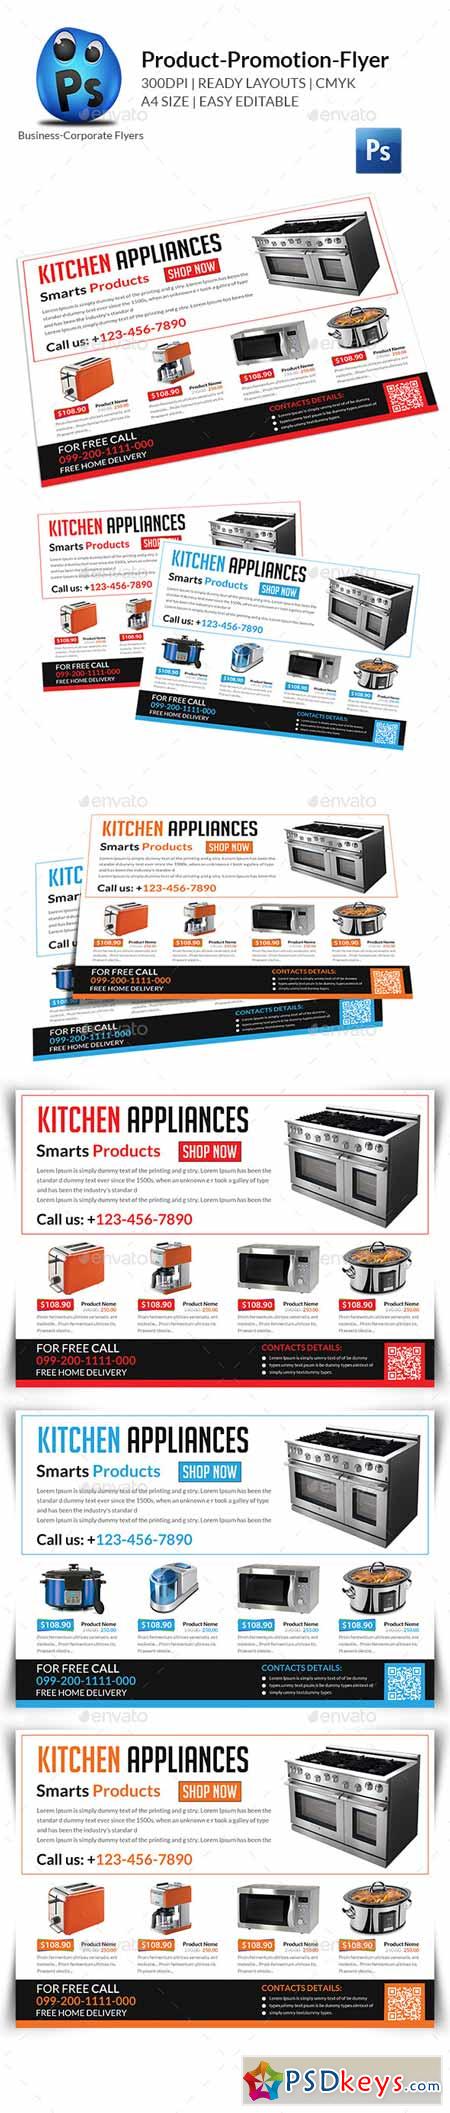 Product Promotion Flyer Templates 11424880